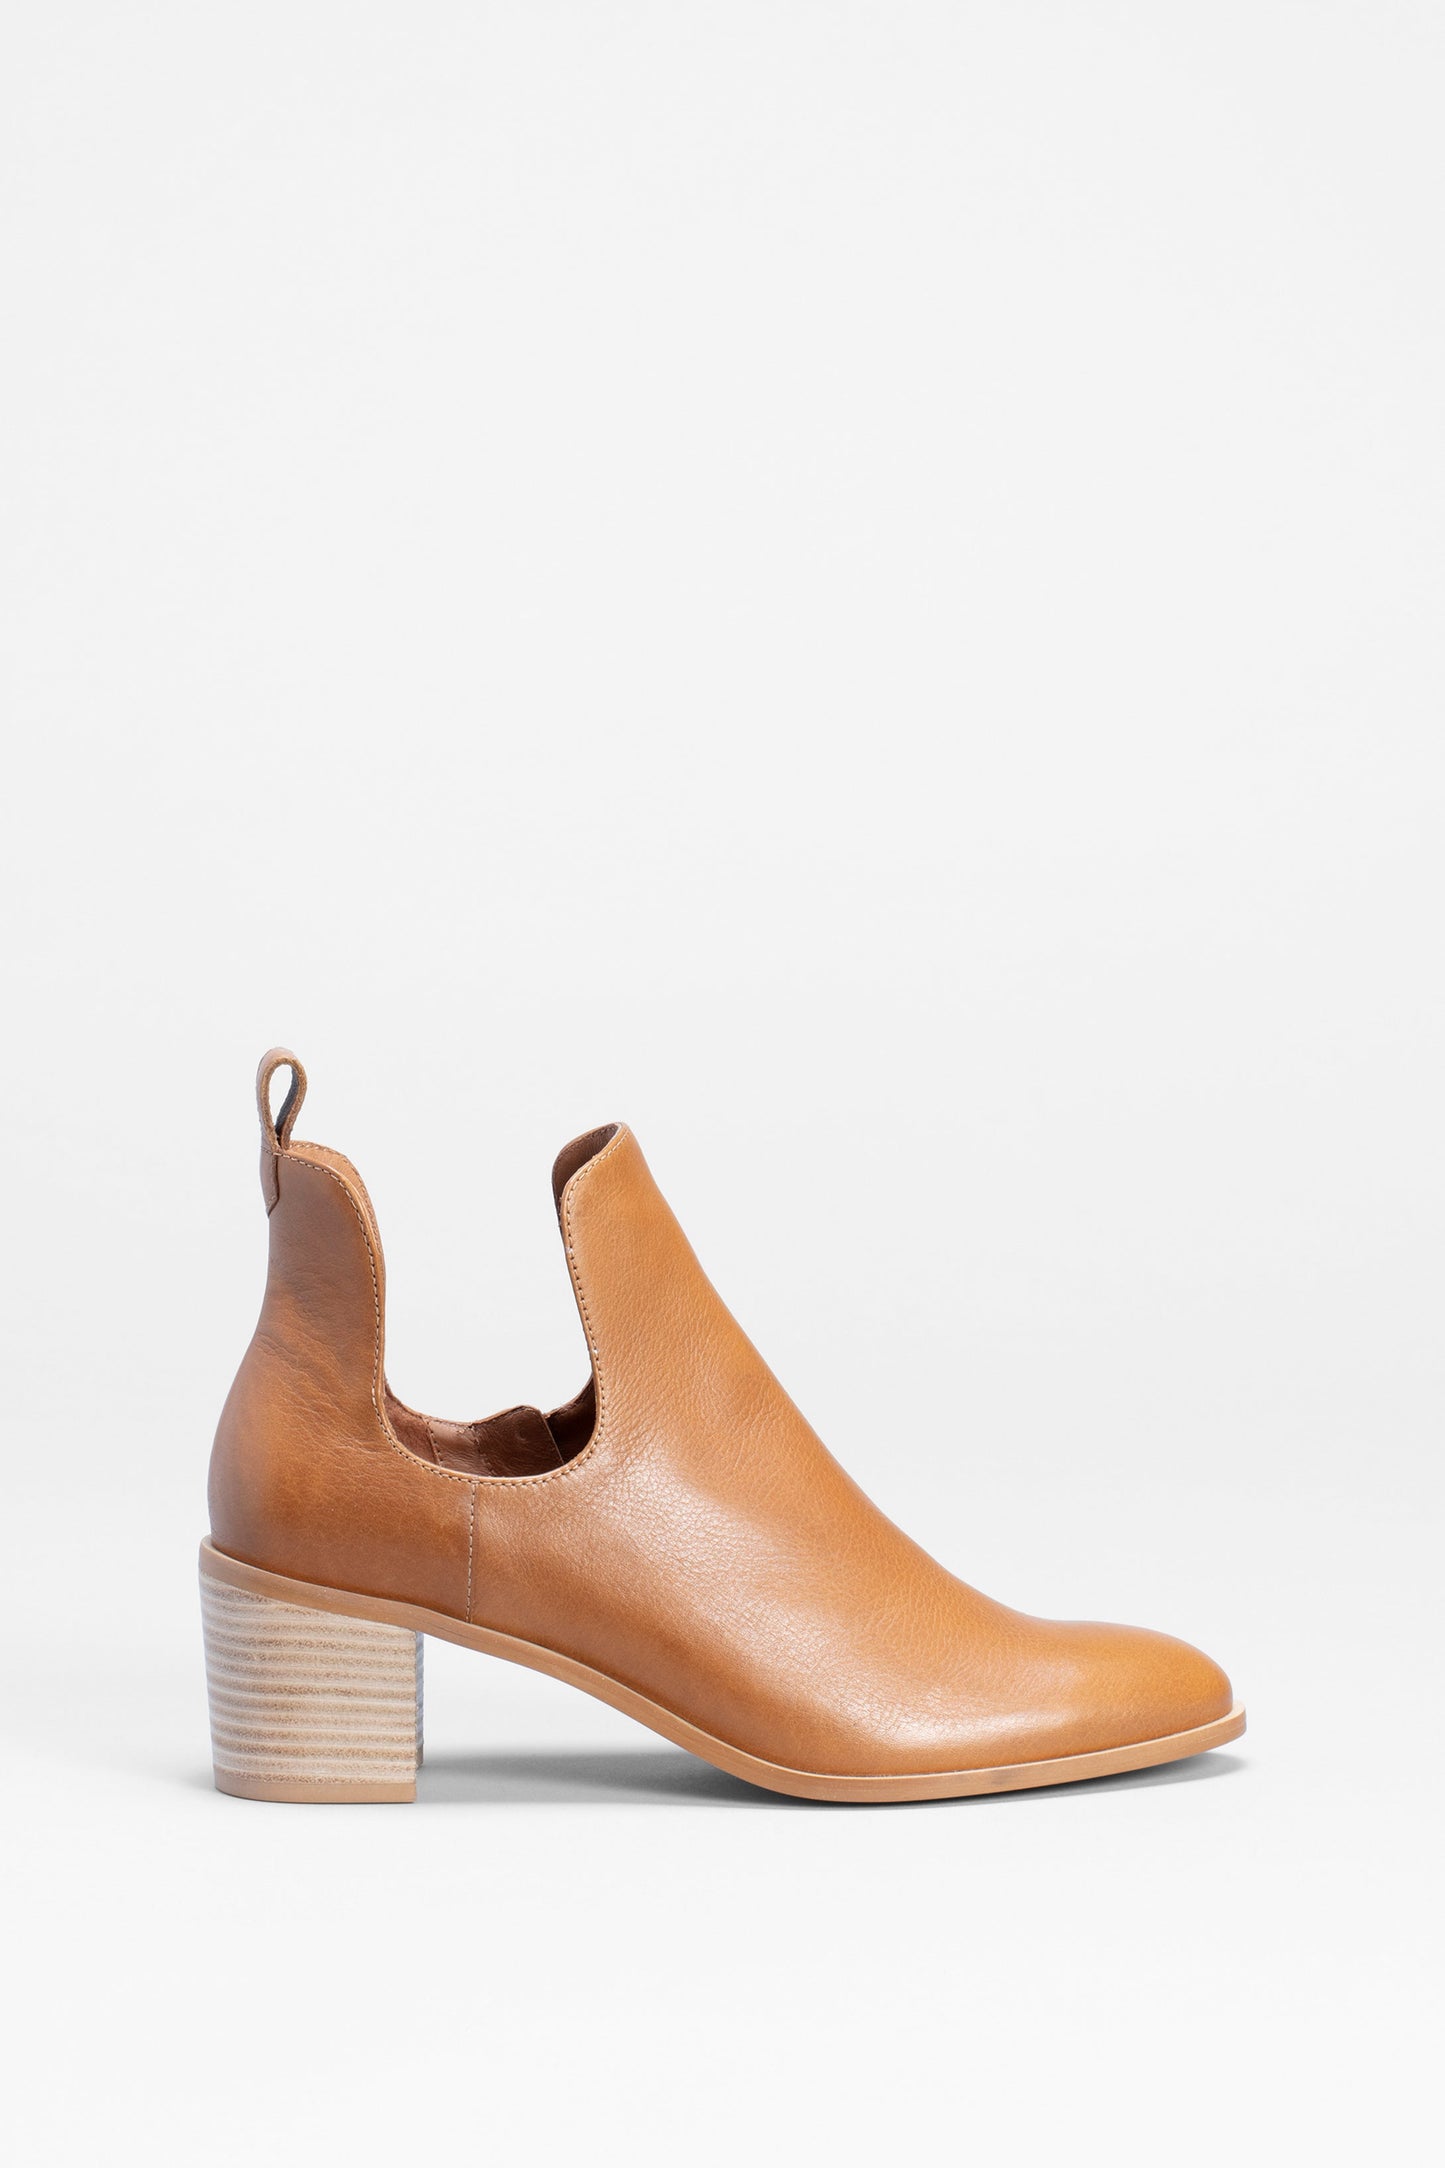 Valla Cut Out Heeled Leather Boot Side | TAN